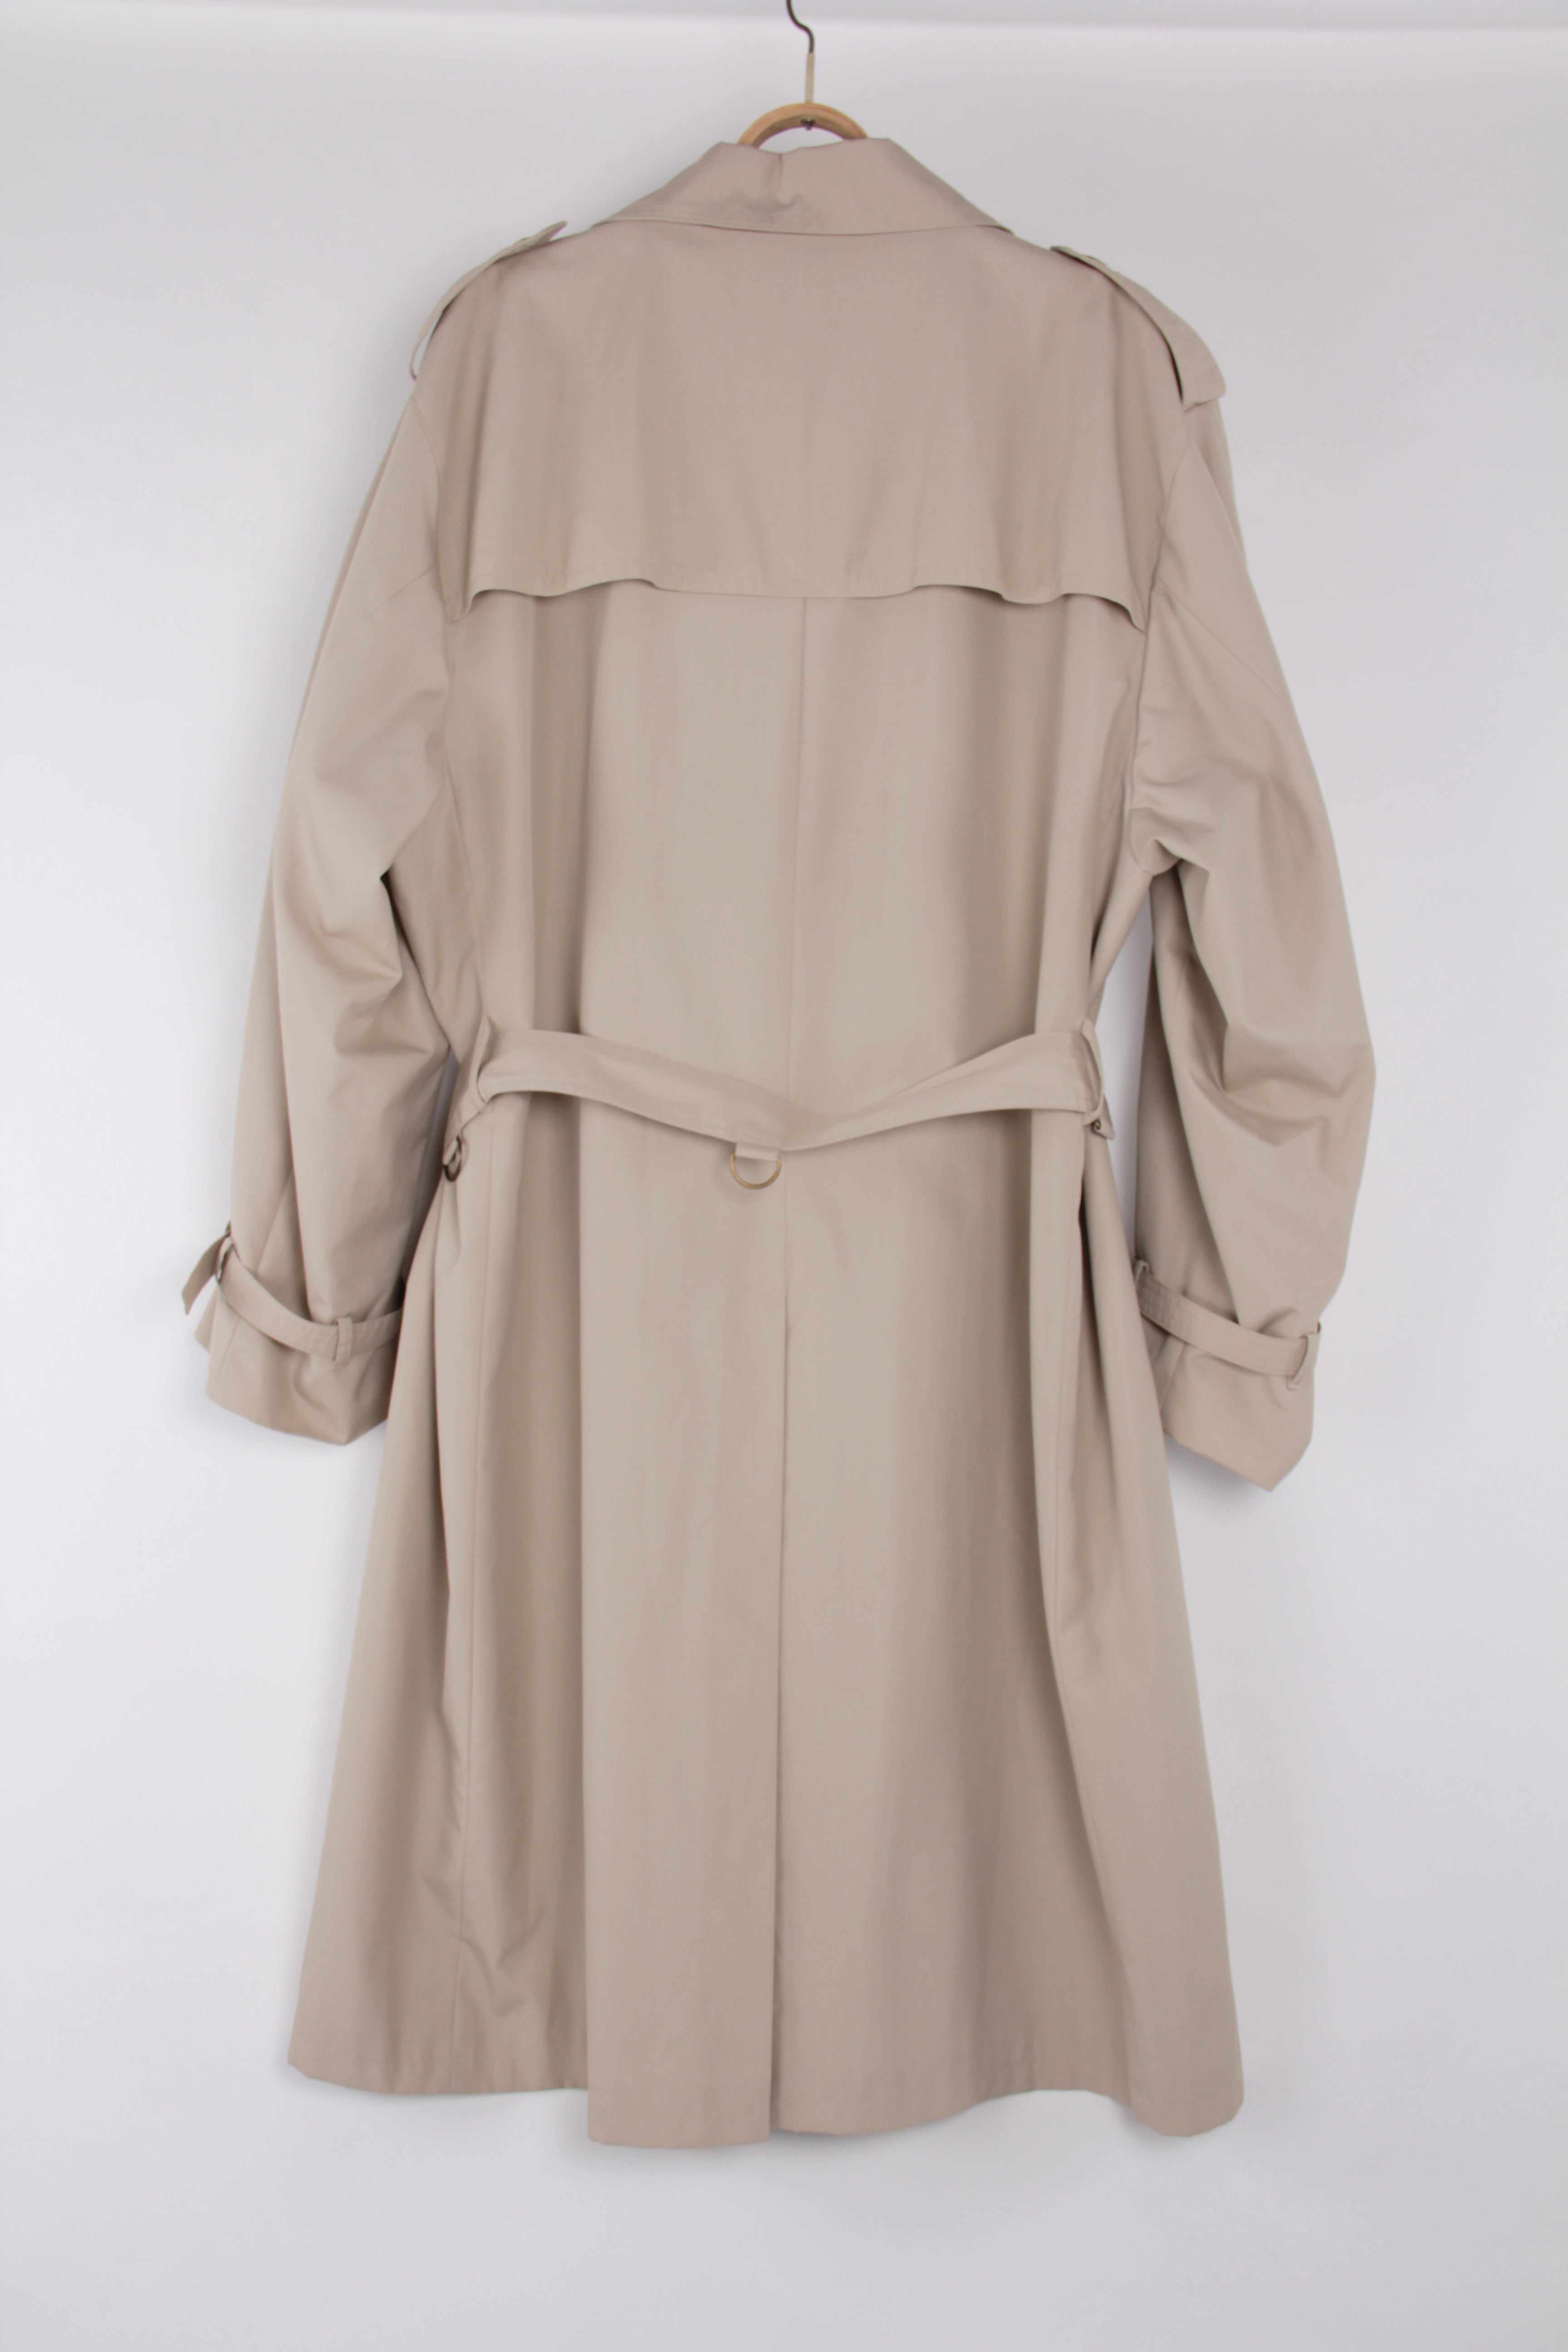 Vintage Double Breasted Beige Trench Coat, Size US 42, EU 52